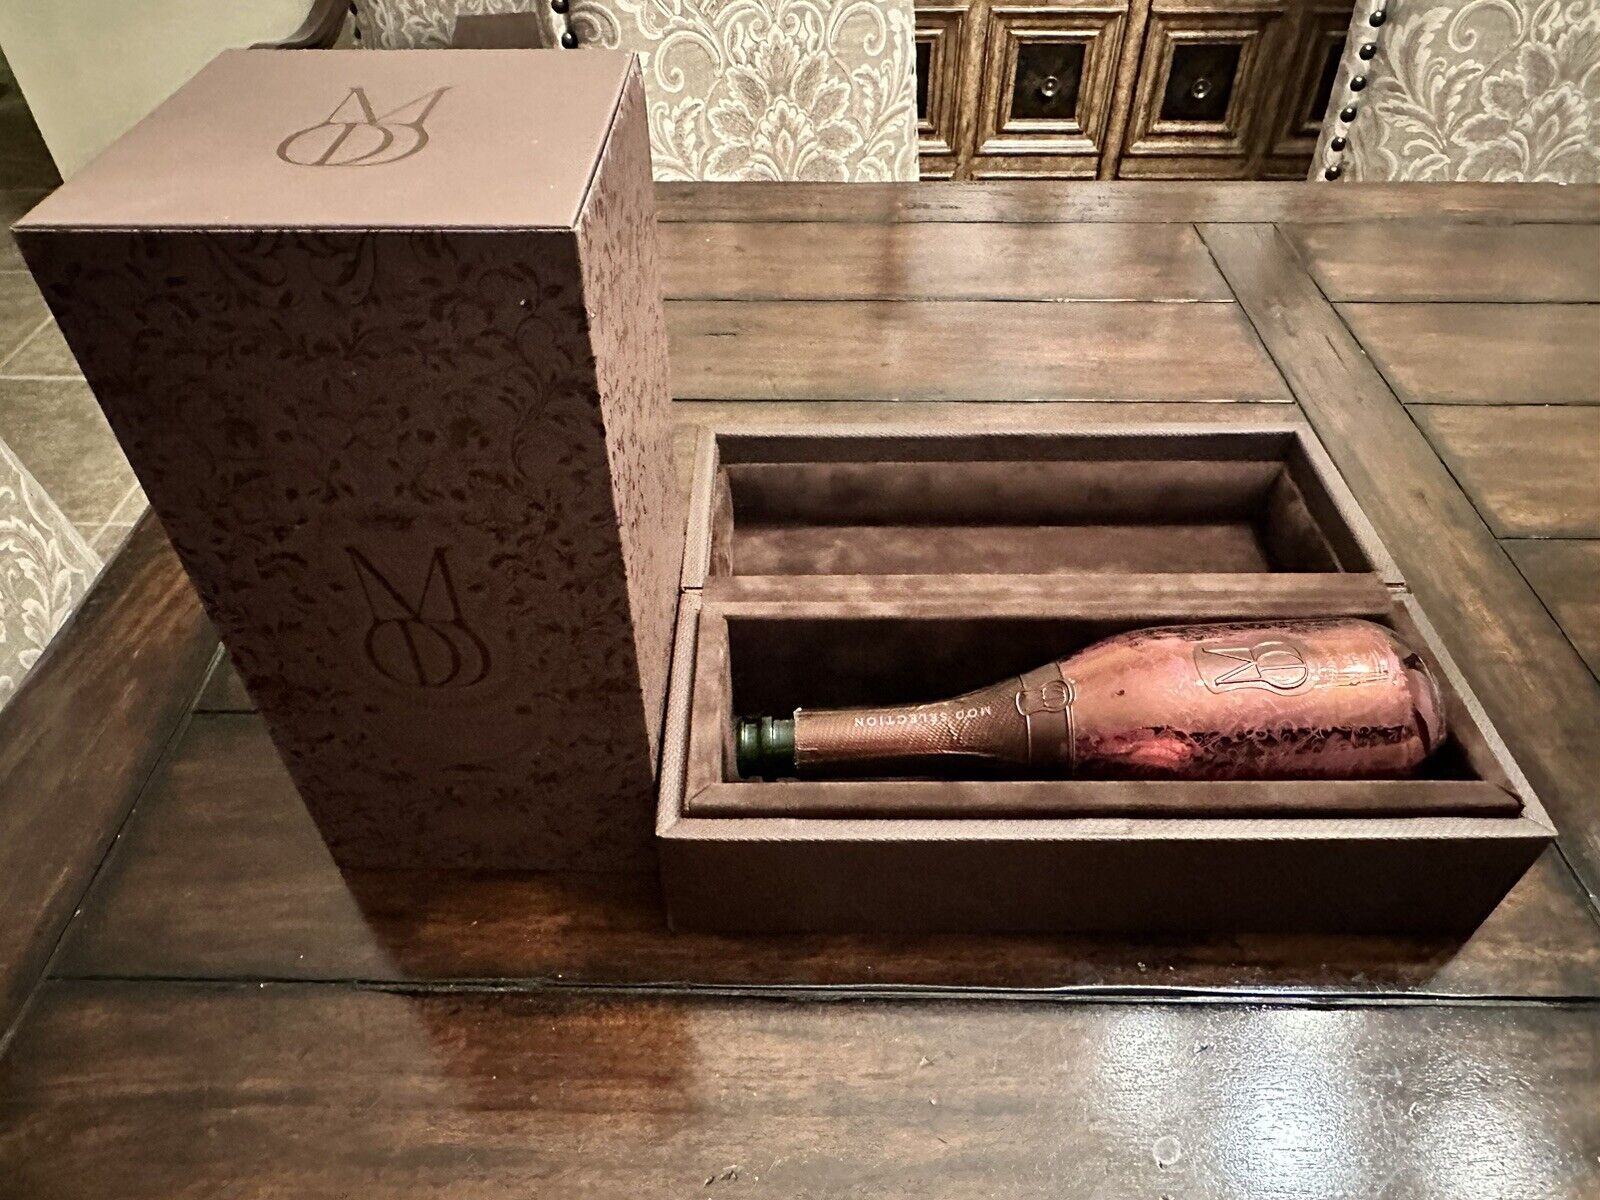 MOD ROSE CHAMPAGNE Empty Gift Box with empty bottle